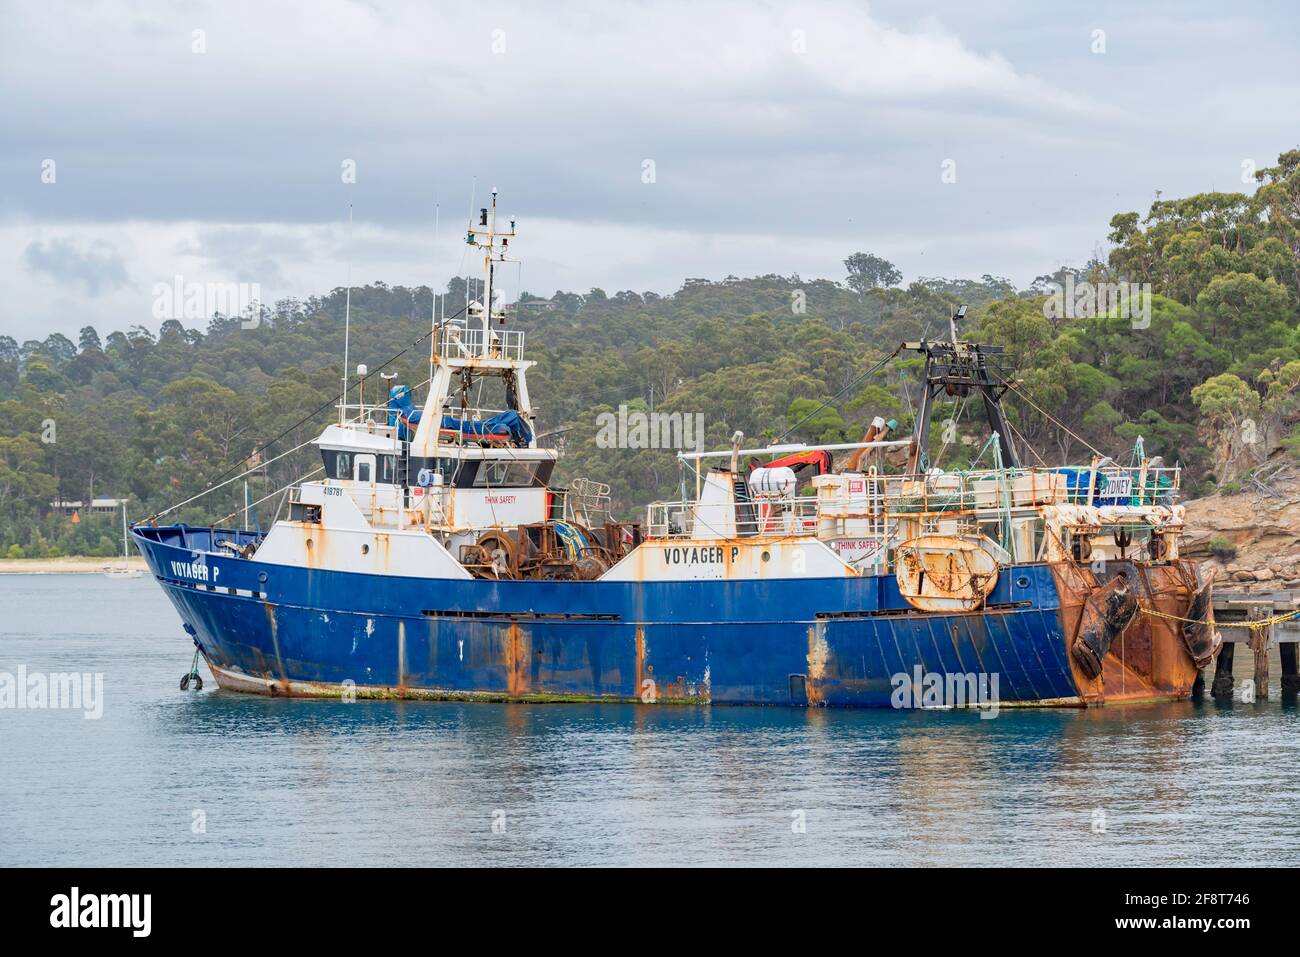 Fishing Vessel is a 321 gross ton and 200 deadweight tons ship seen here moored at the Port of Eden on the New South Wales south coast of Australia Stock Photo